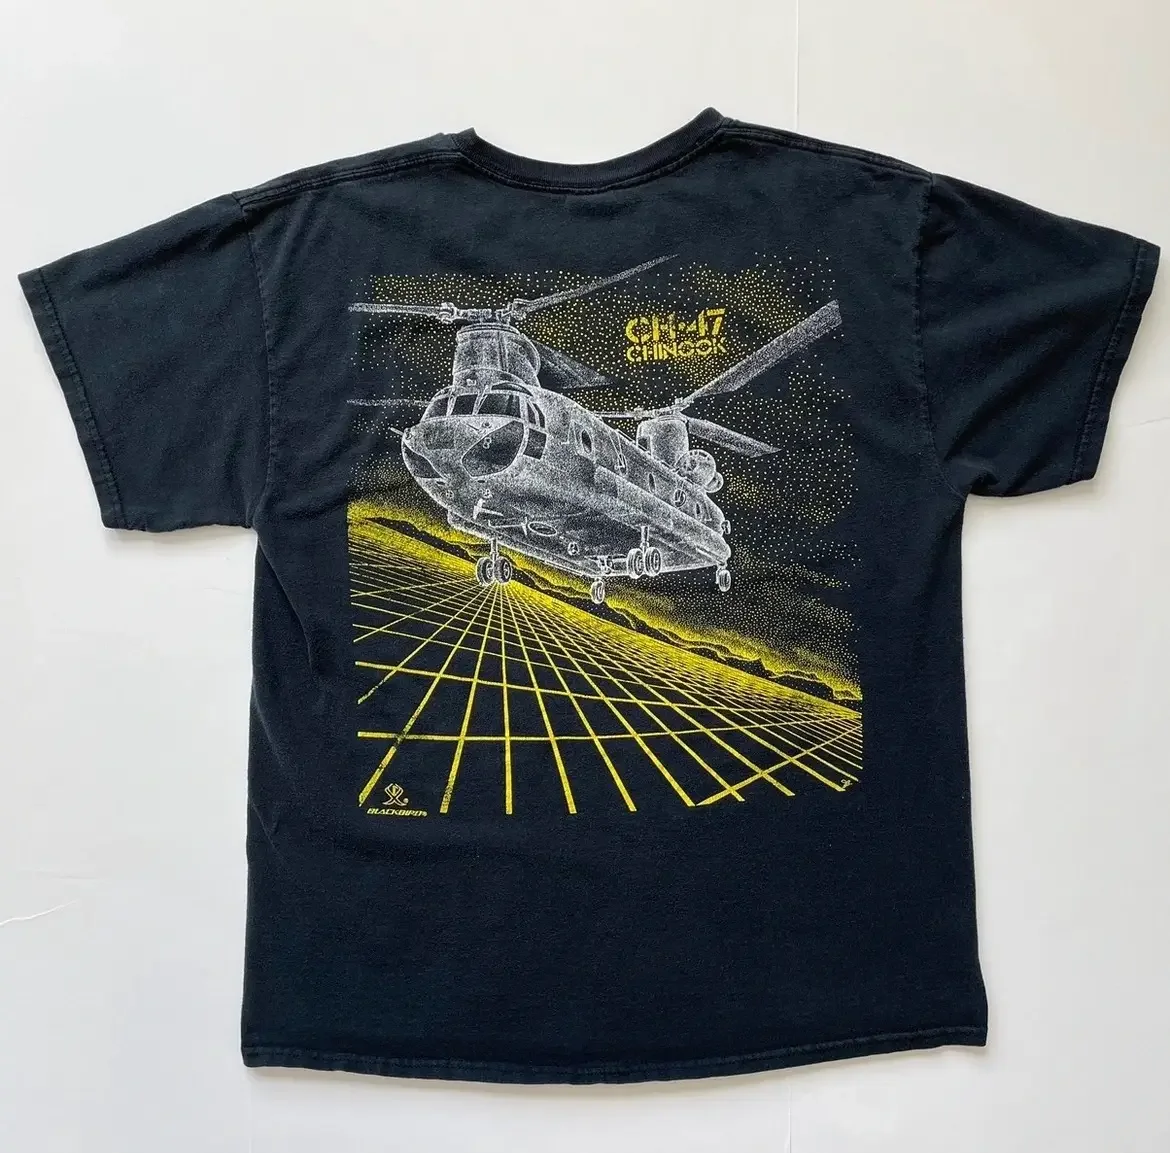 

CH-47 Chinook Transport Helicopter Line Drawing Printed T-Shirt. Summer Cotton Short Sleeve O-Neck Mens T Shirt New S-3XL